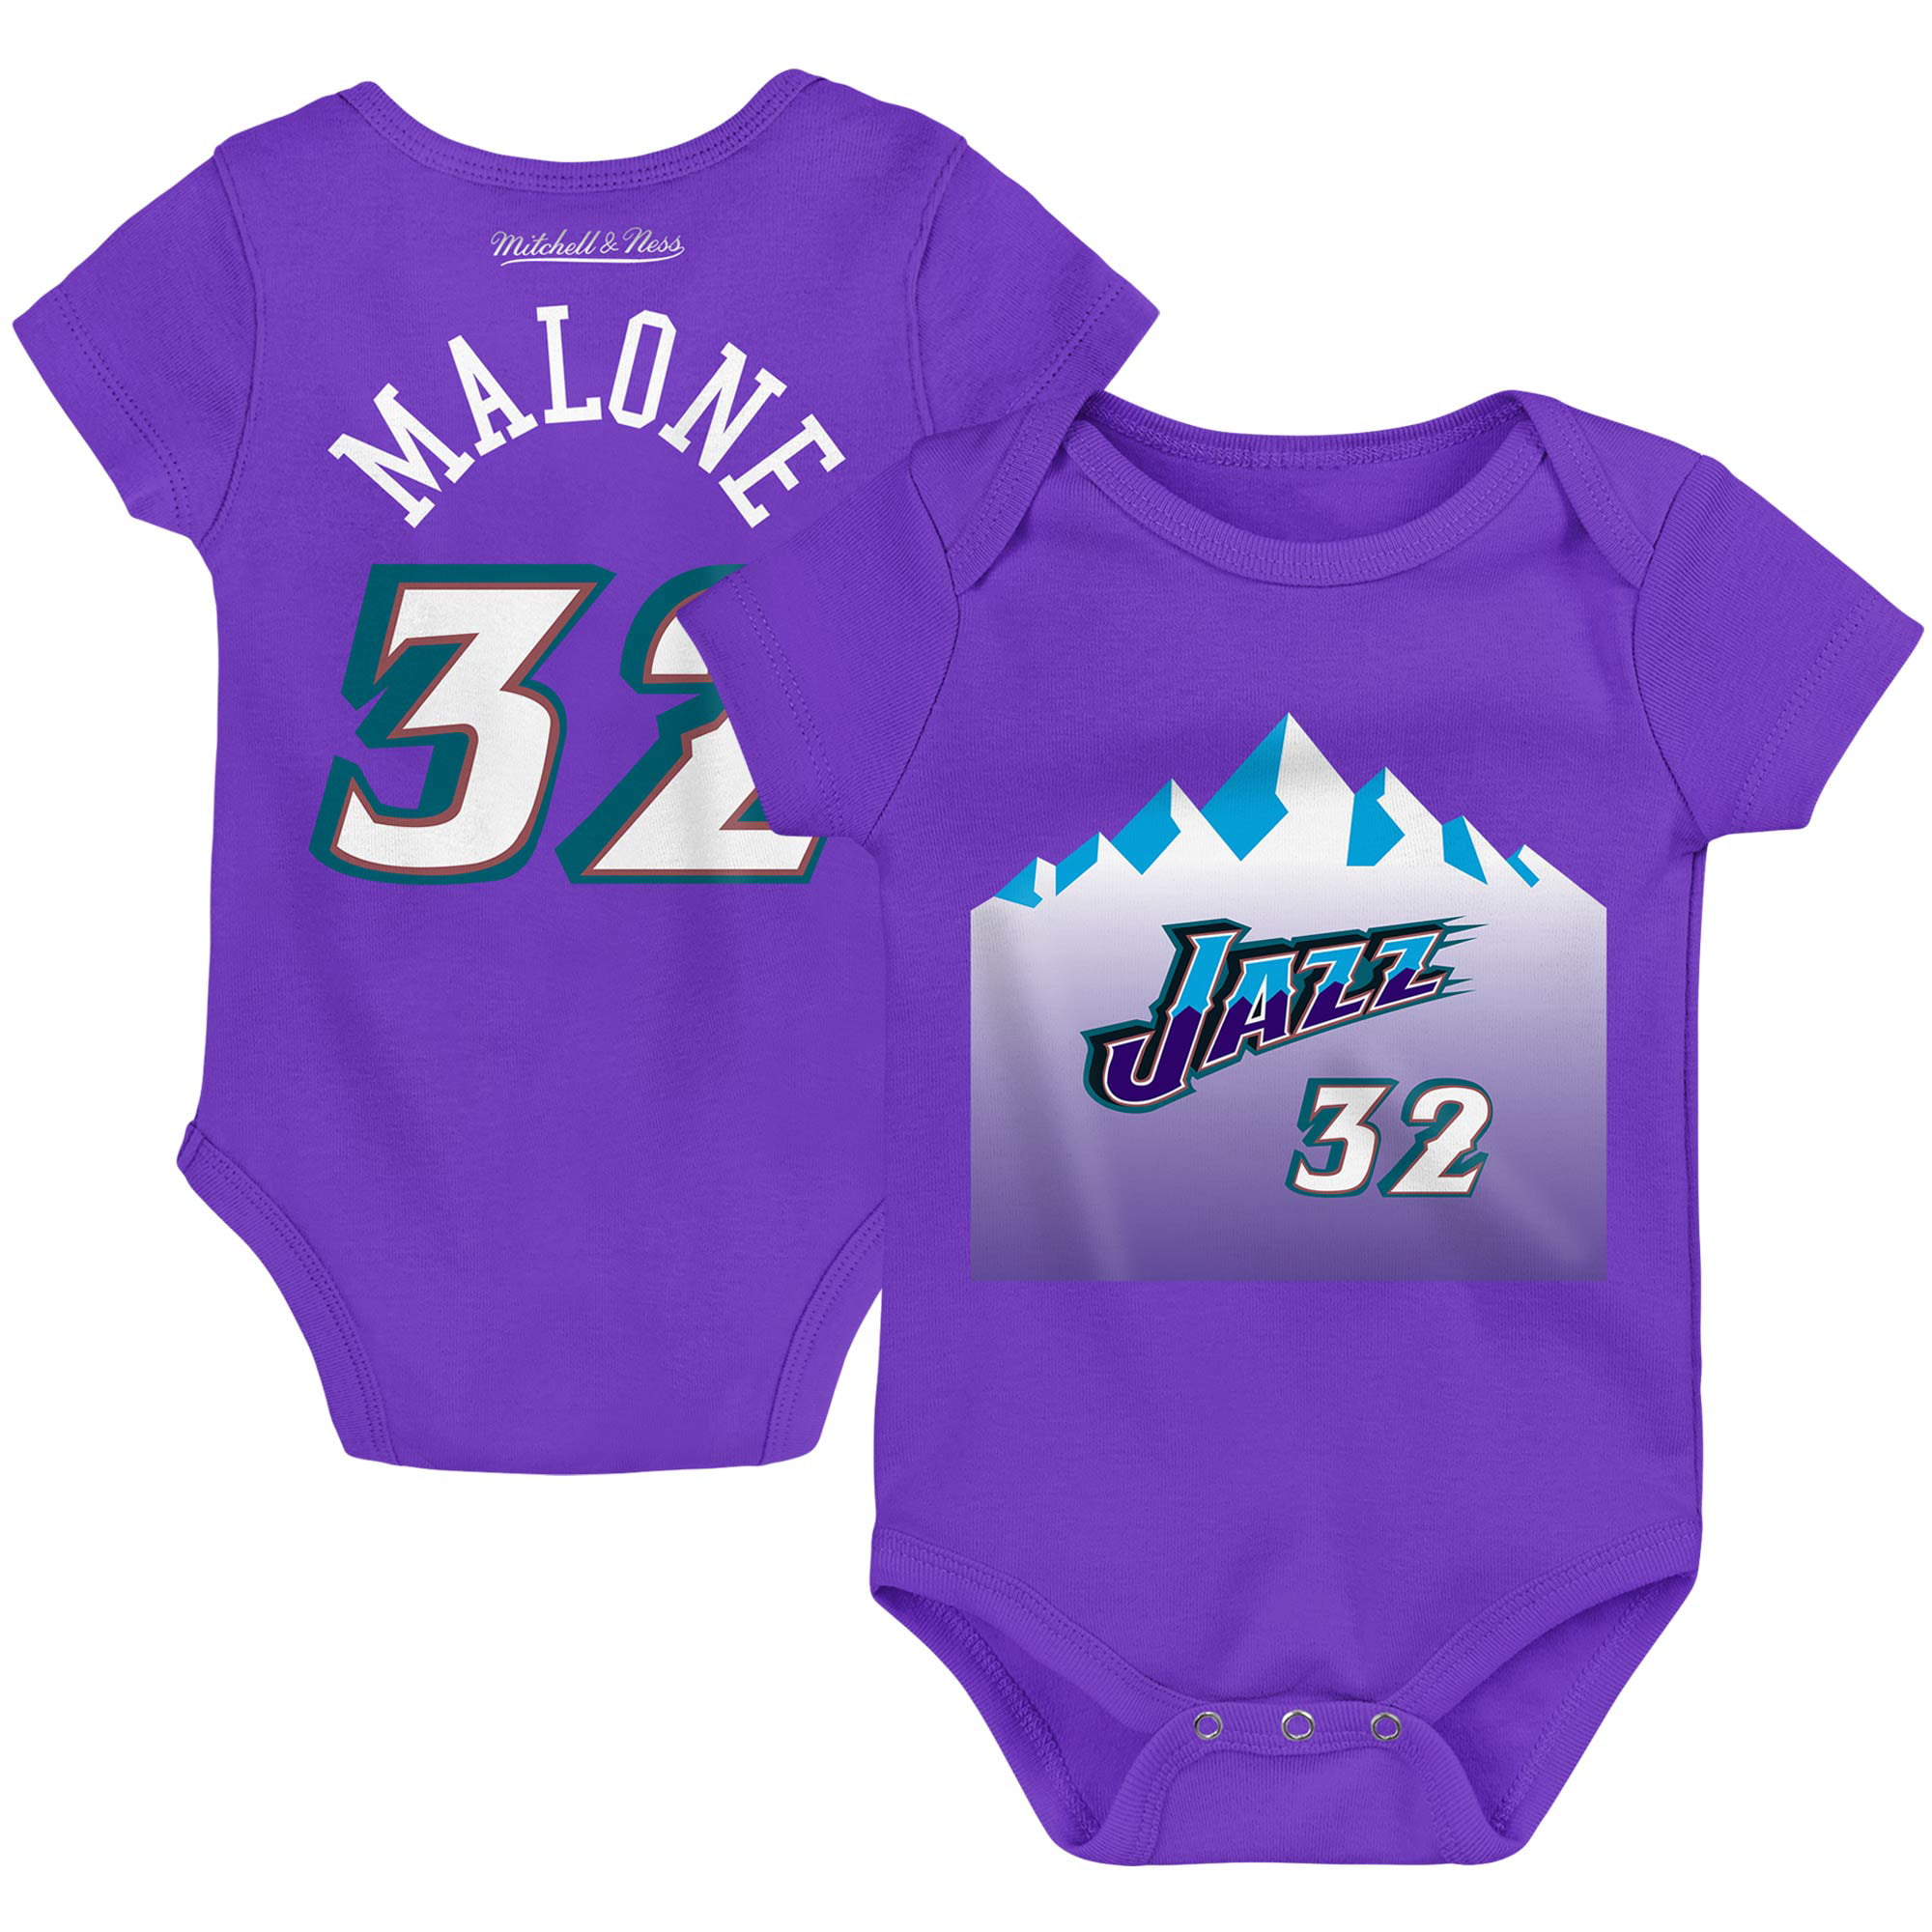 newest Ravens fan BLUE baby body customized personalized NAME NUMBER clothing kids toddler football baby bodysuit